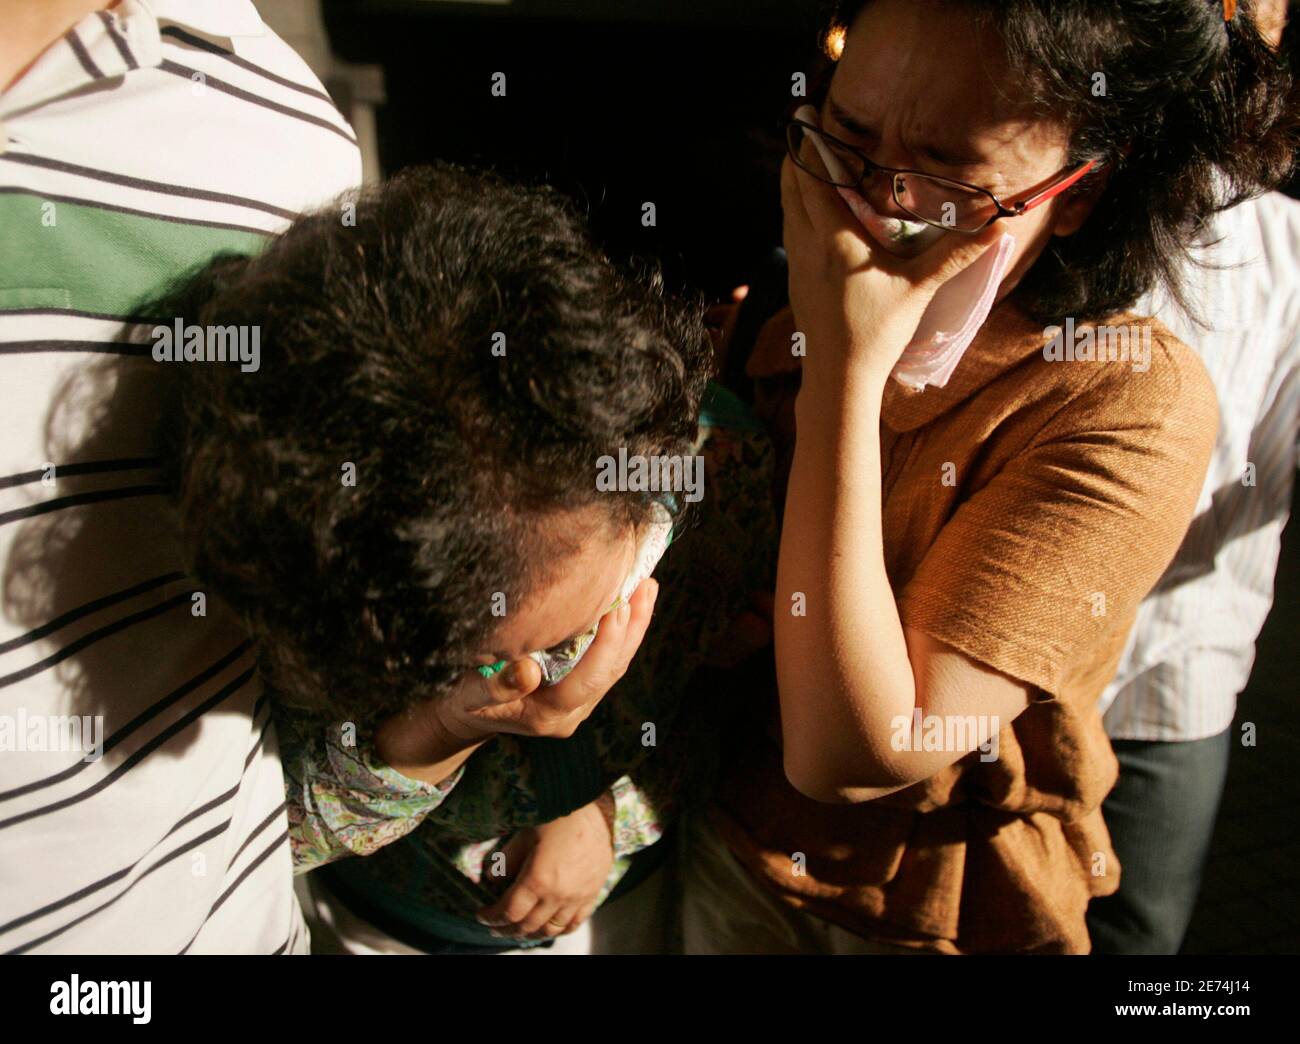 Family members of Sim Sung-min, 29, one of the kidnapped South Koreans in Afghanistan, cry after watching television news about him in Seongnam, south of Seoul, July 31, 2007. Taliban kidnappers shot dead a male South Korean hostage on Monday, accusing the Afghan government of not listening to rebel demands for the release of Taliban prisoners. The identity of the dead hostage has yet to be officially announced.  REUTERS/Han Jae-Ho (SOUTH KOREA) Stock Photo